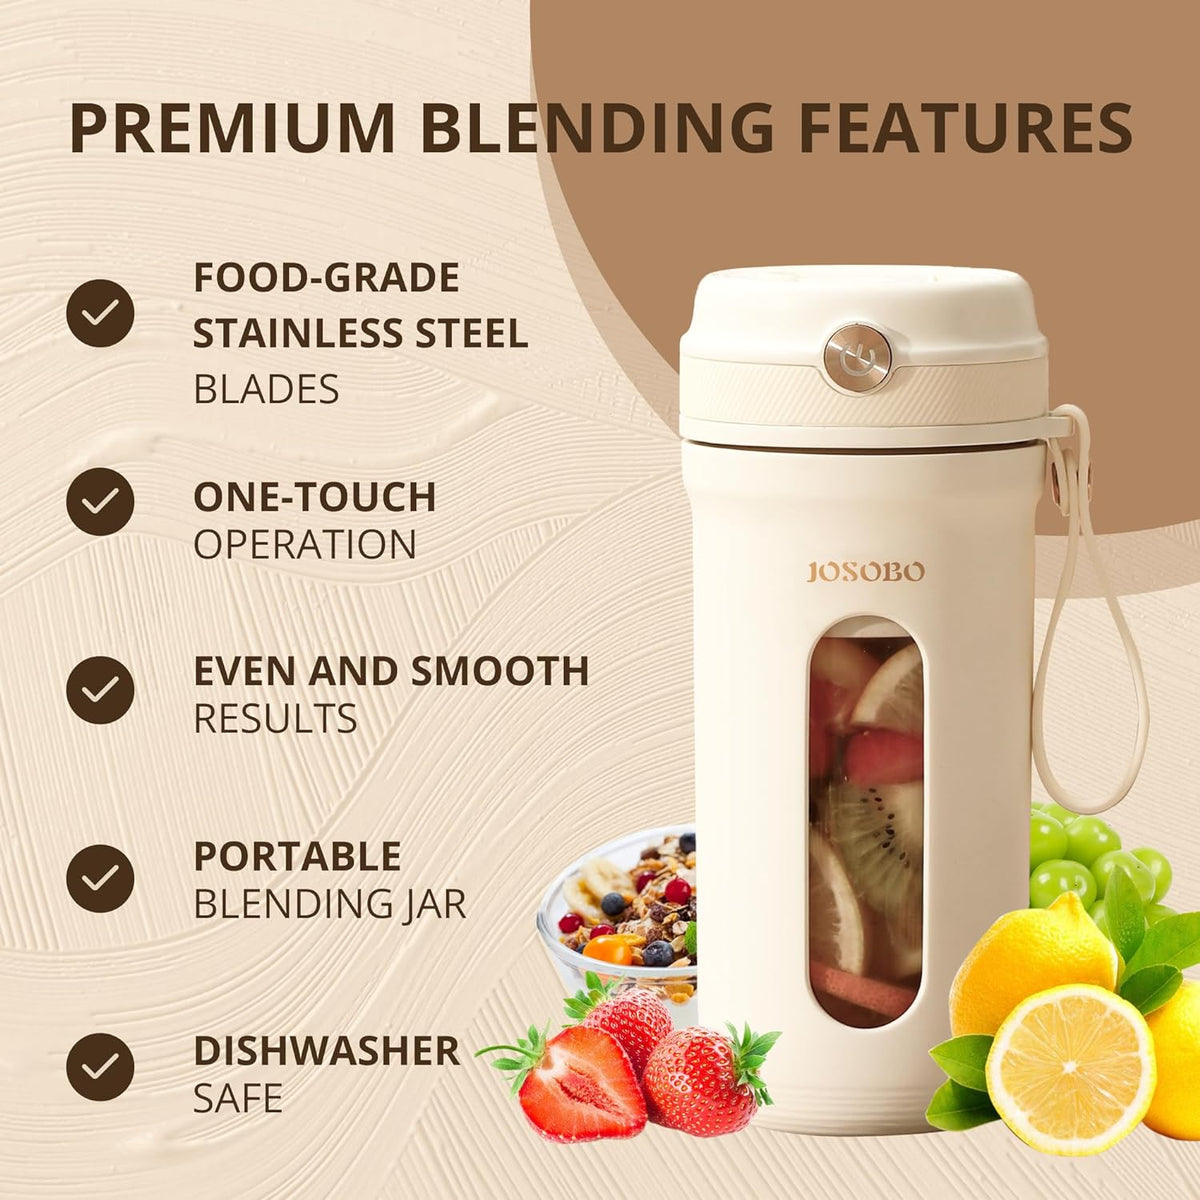 JOSOBO Portable Blender, Personal Size Blender for Shakes and Smoothies with 10 Ultra Sharp Blades, 16 Oz Mini Blender for Travel, Picnic, Office, Gym